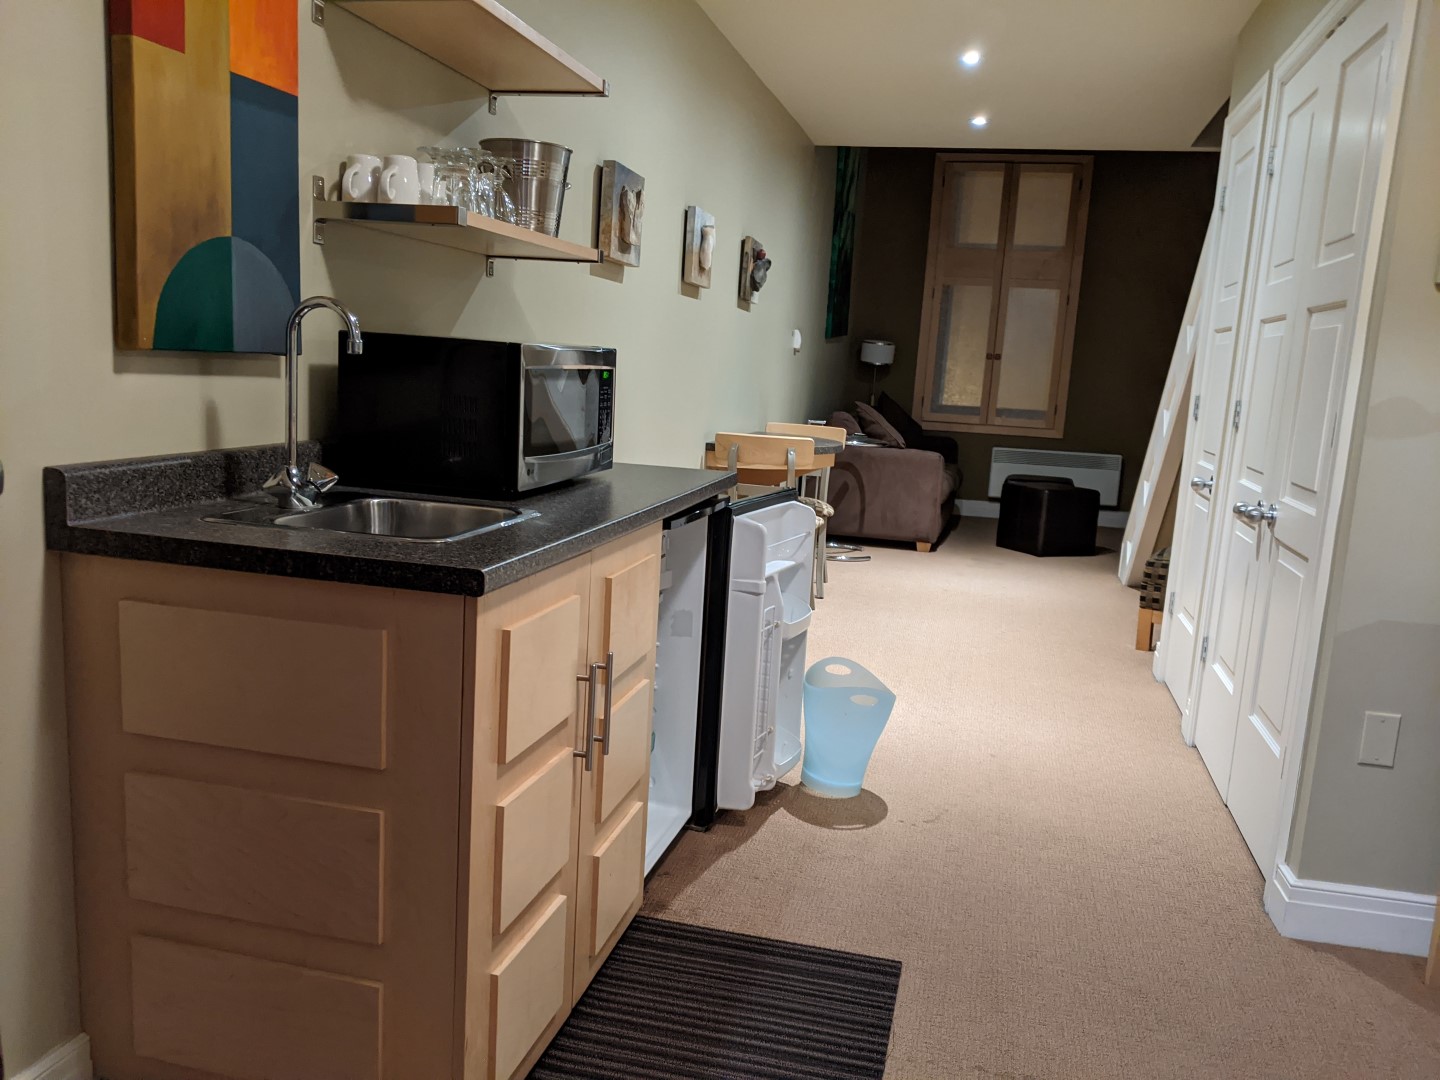 kitchenette at Bentley's Loft Stratford accommodations for families